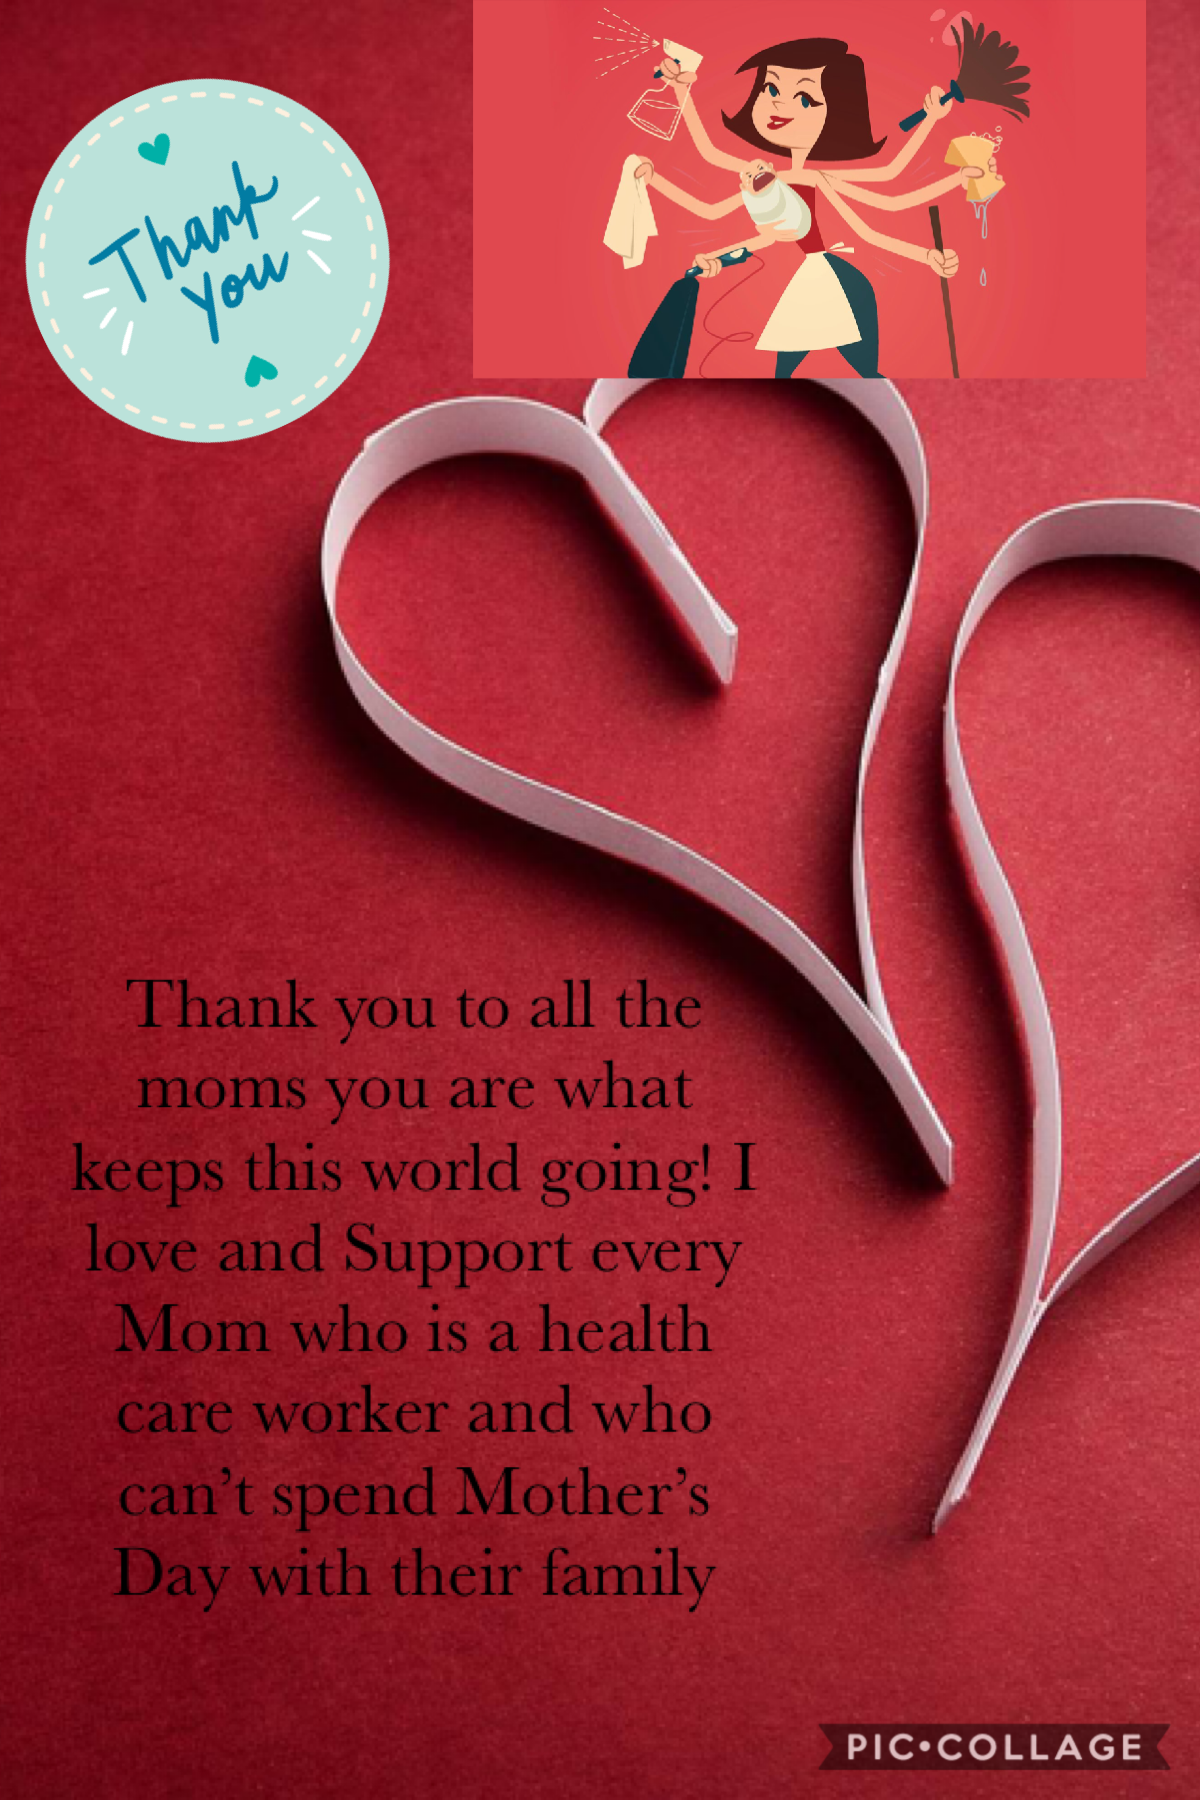 Thank you to all the moms out there you are helping your family through this time! All of the moms out there who are health care workers and can’t spend this Mother’s Day with Thier family we love you and everything you are doing to help the world thank y